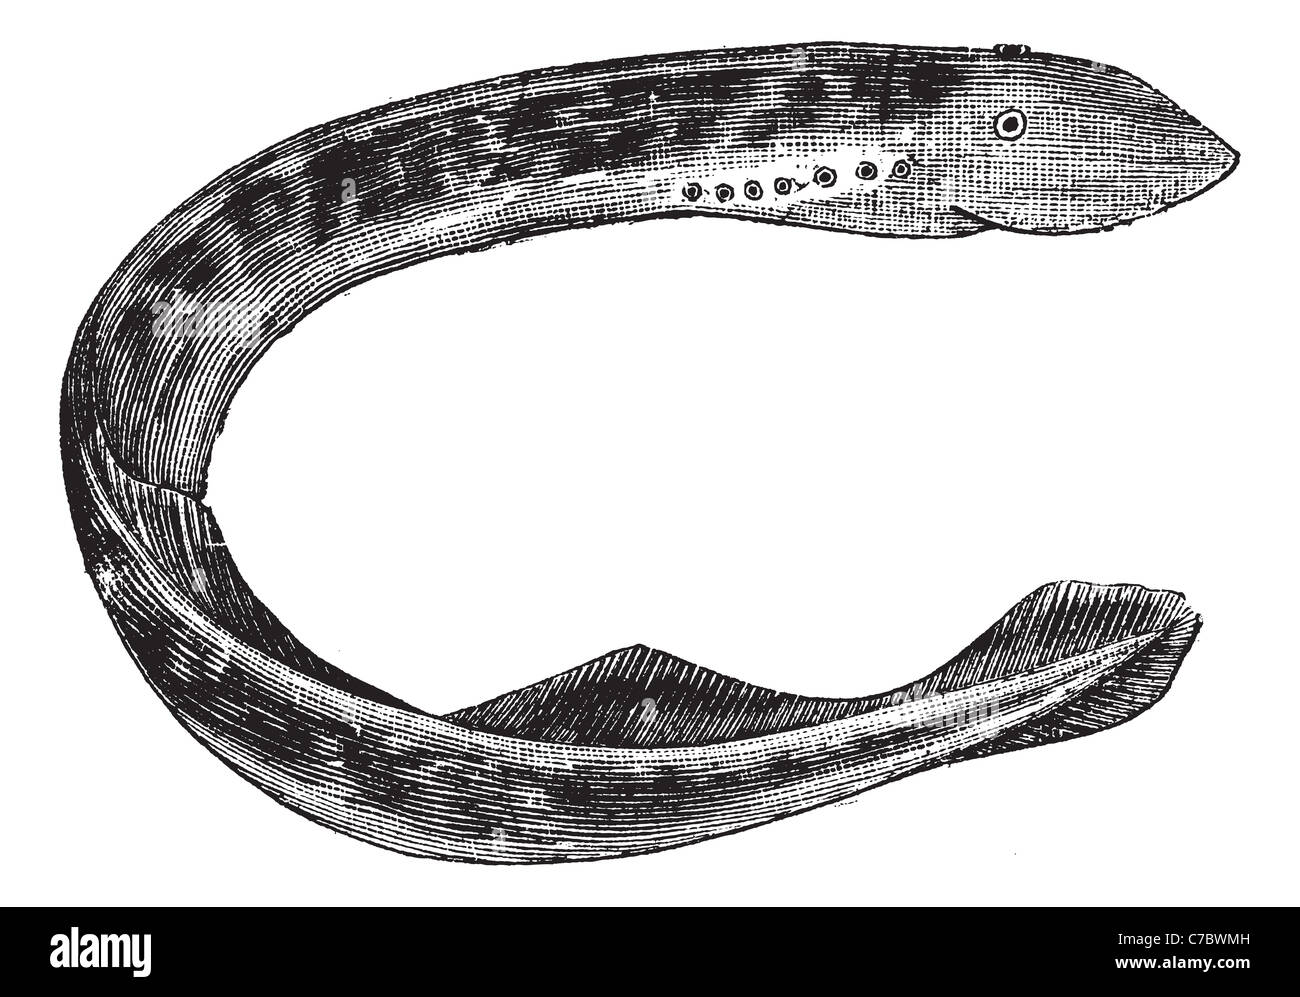 Lamprey of america or Sea lamprey vintage engraving.Old engraved illustration of Lamprey of america isolated on white background Stock Photo